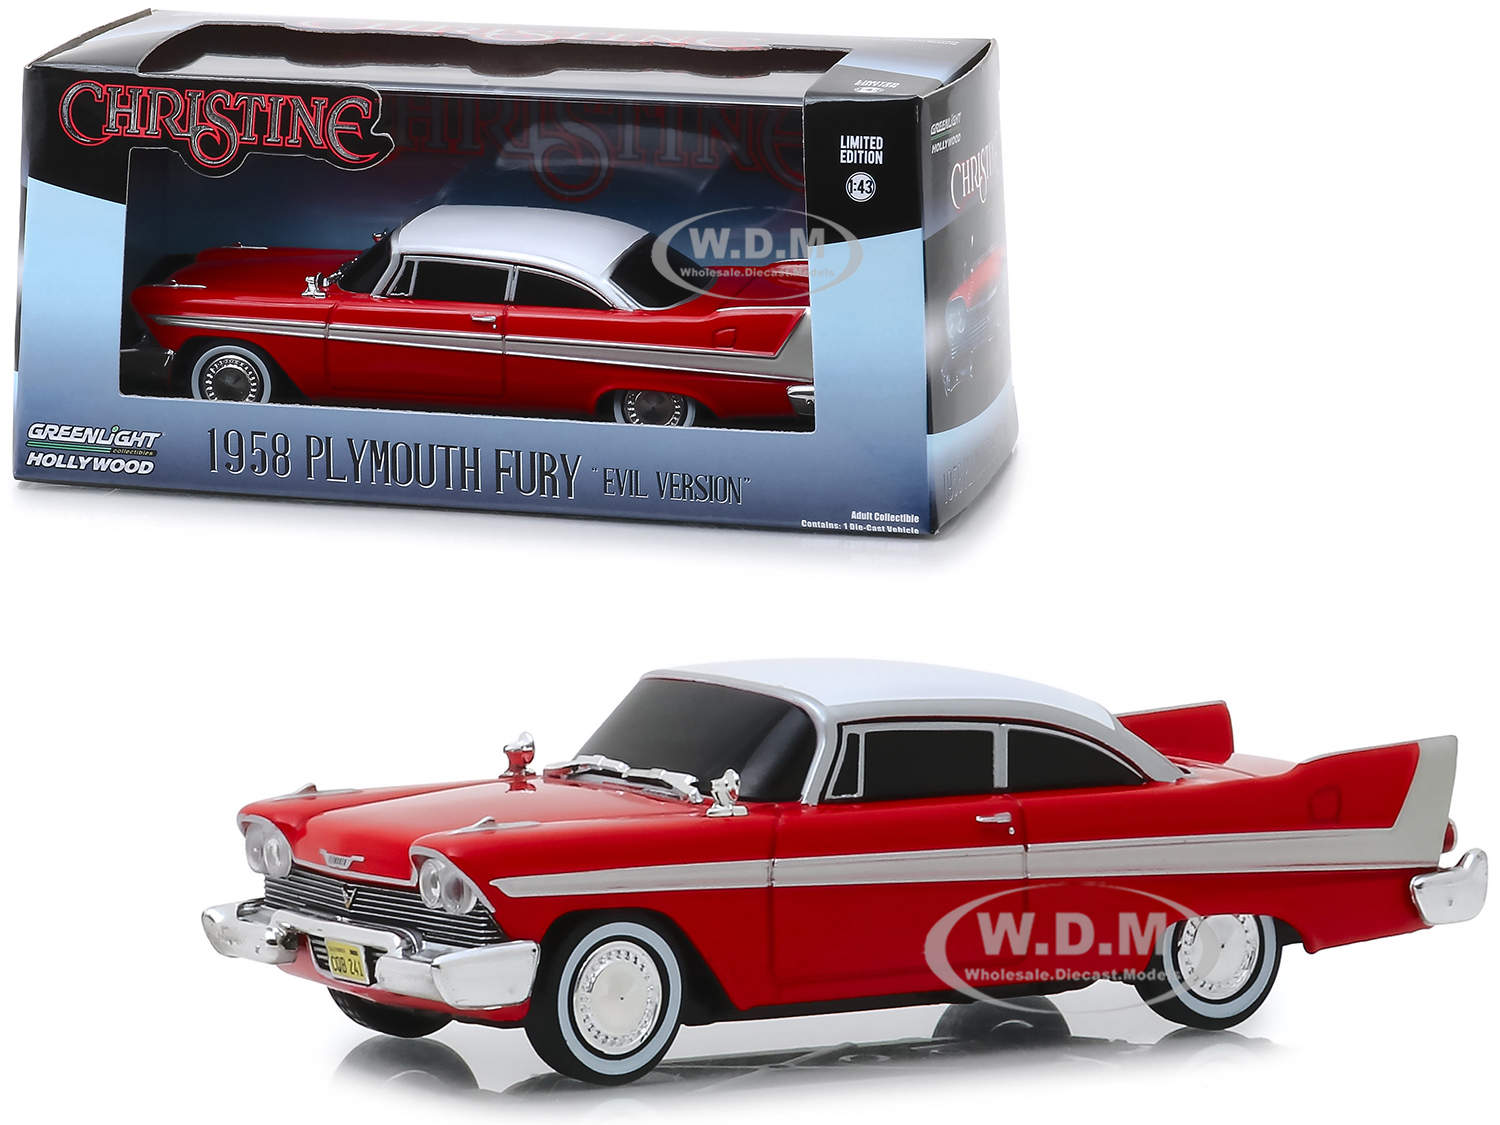 1958 Plymouth Fury Red (evil Version With Blacked Out Windows) "christine" (1983) Movie 1/43 Diecast Model Car By Greenlight